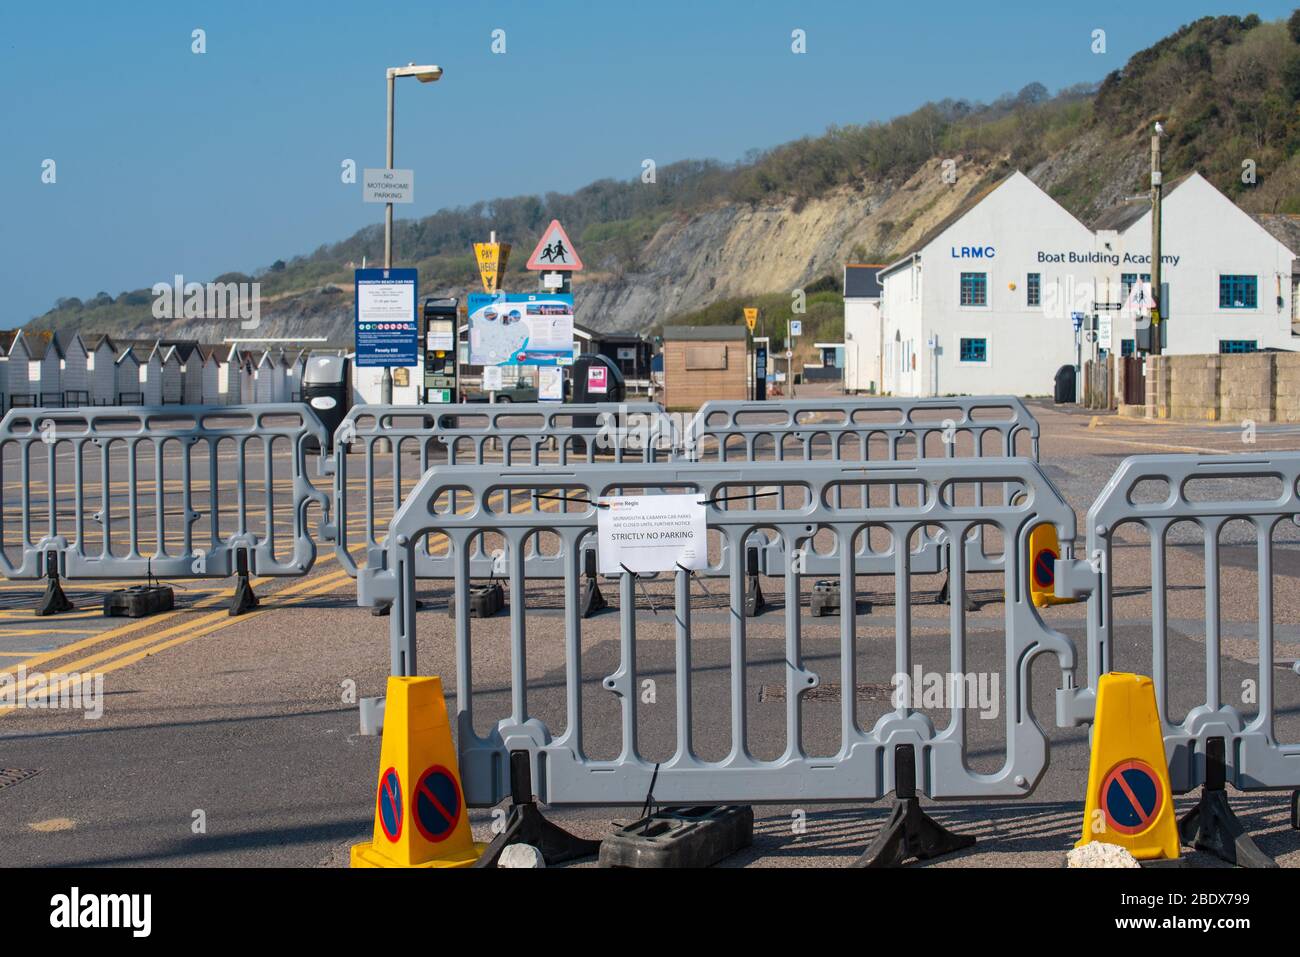 Lyme Regis, Dorset, UK. 10th Apr, 2020. UK Covid-19: Lyme Regis' carparks are closed on Good Friday to encourage visitors to stay away in light of the coronavirus pandemic. Tourism is the main industry for the town and the economic impact of the lockdown on the small business in the town is already beginning bite. Credit: Celia McMahon/Alamy Live News Stock Photo